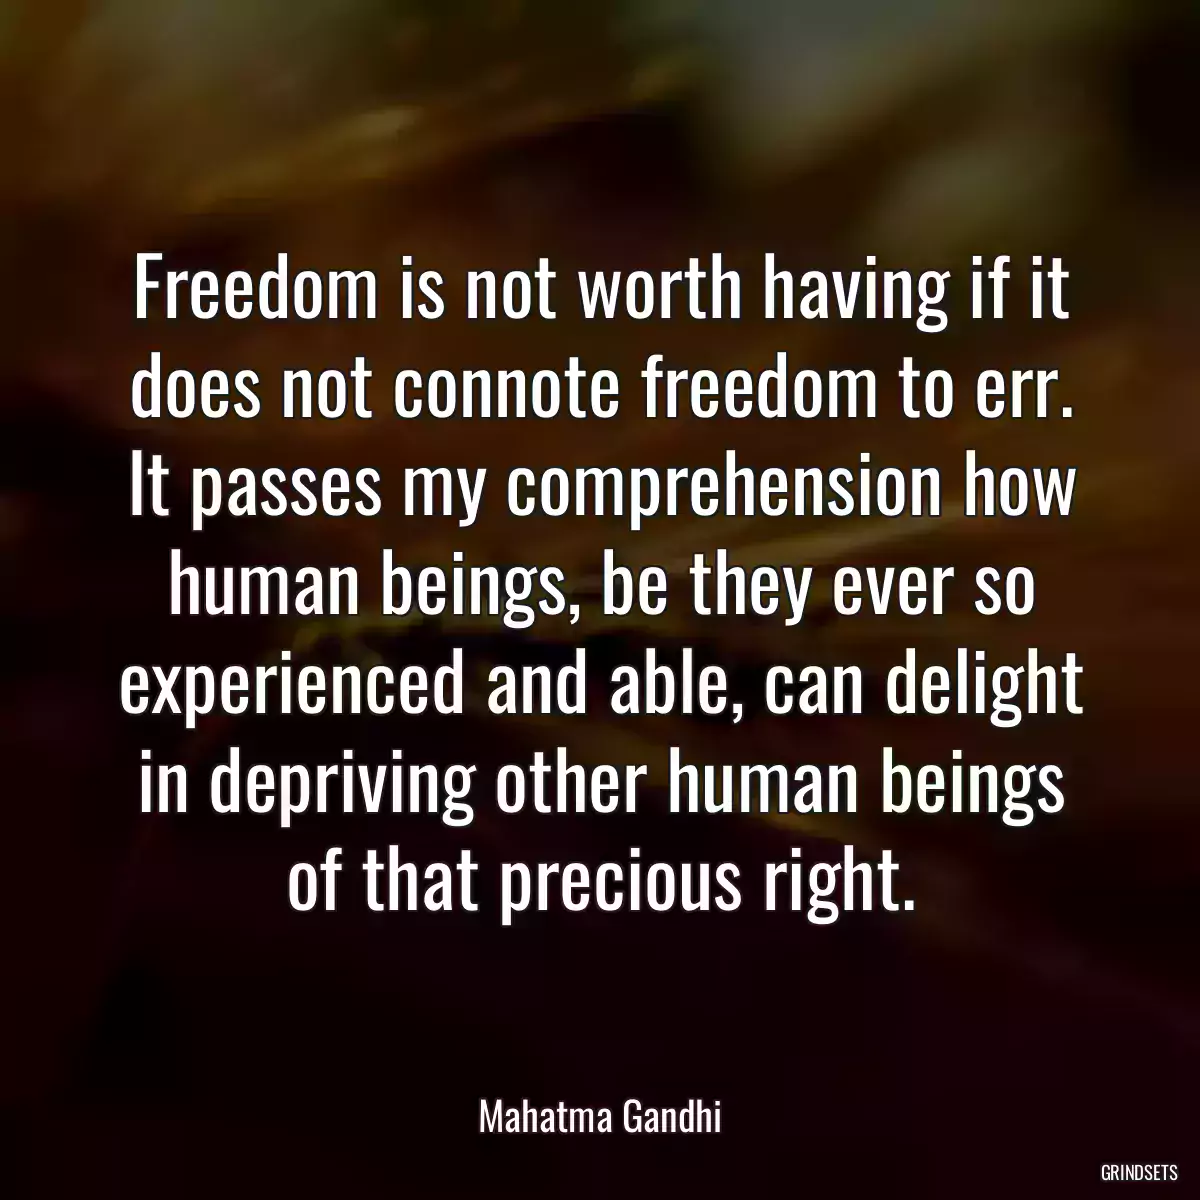 Freedom is not worth having if it does not connote freedom to err. It passes my comprehension how human beings, be they ever so experienced and able, can delight in depriving other human beings of that precious right.